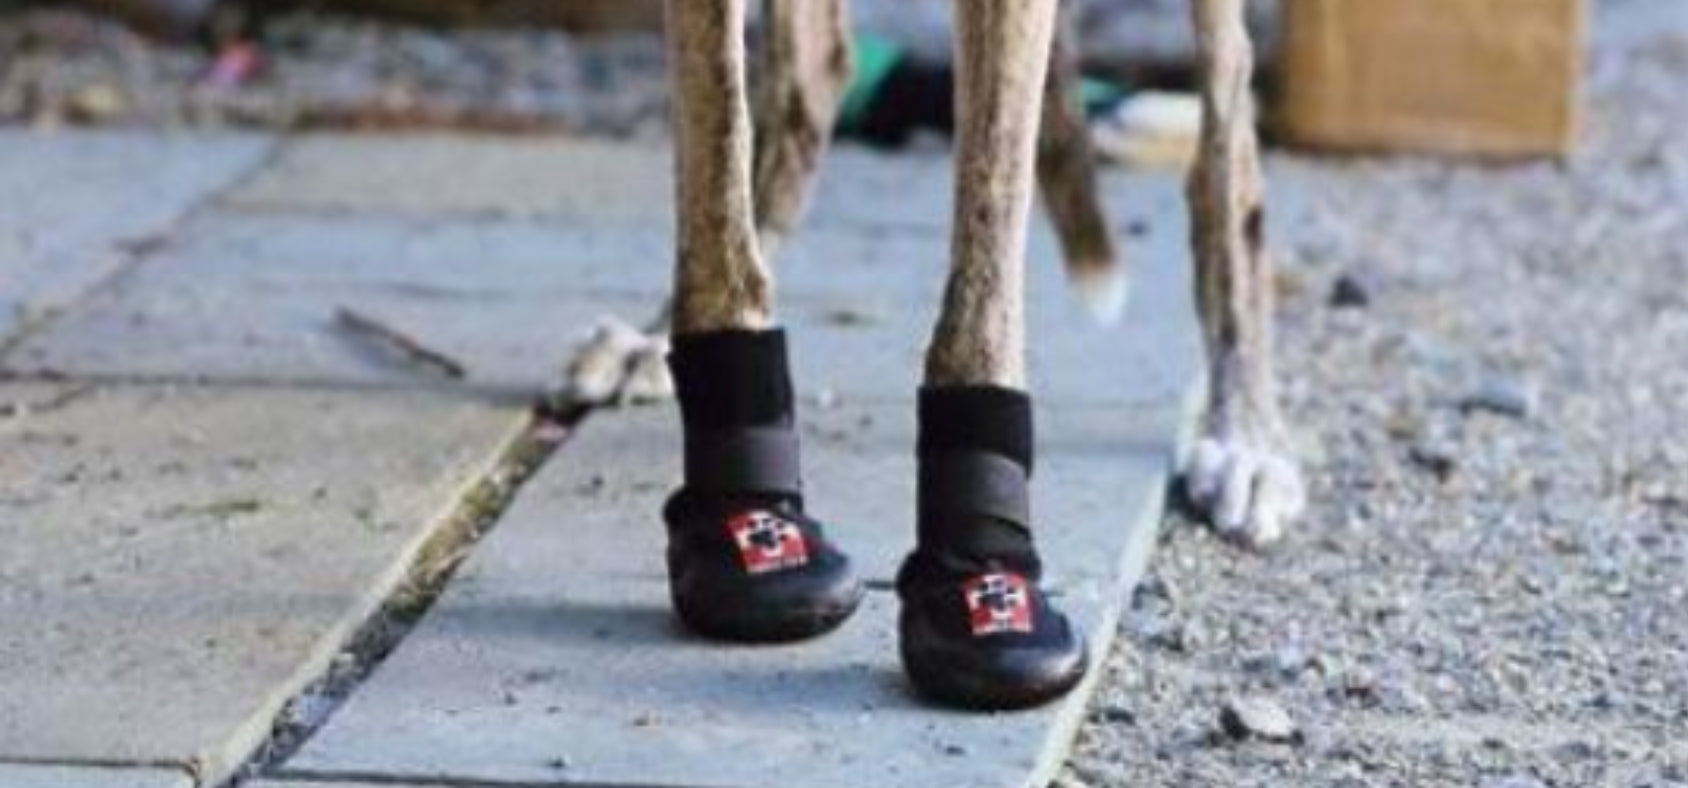 Protective Dog Boots: How to Choose the Correct Boots for Your Dog